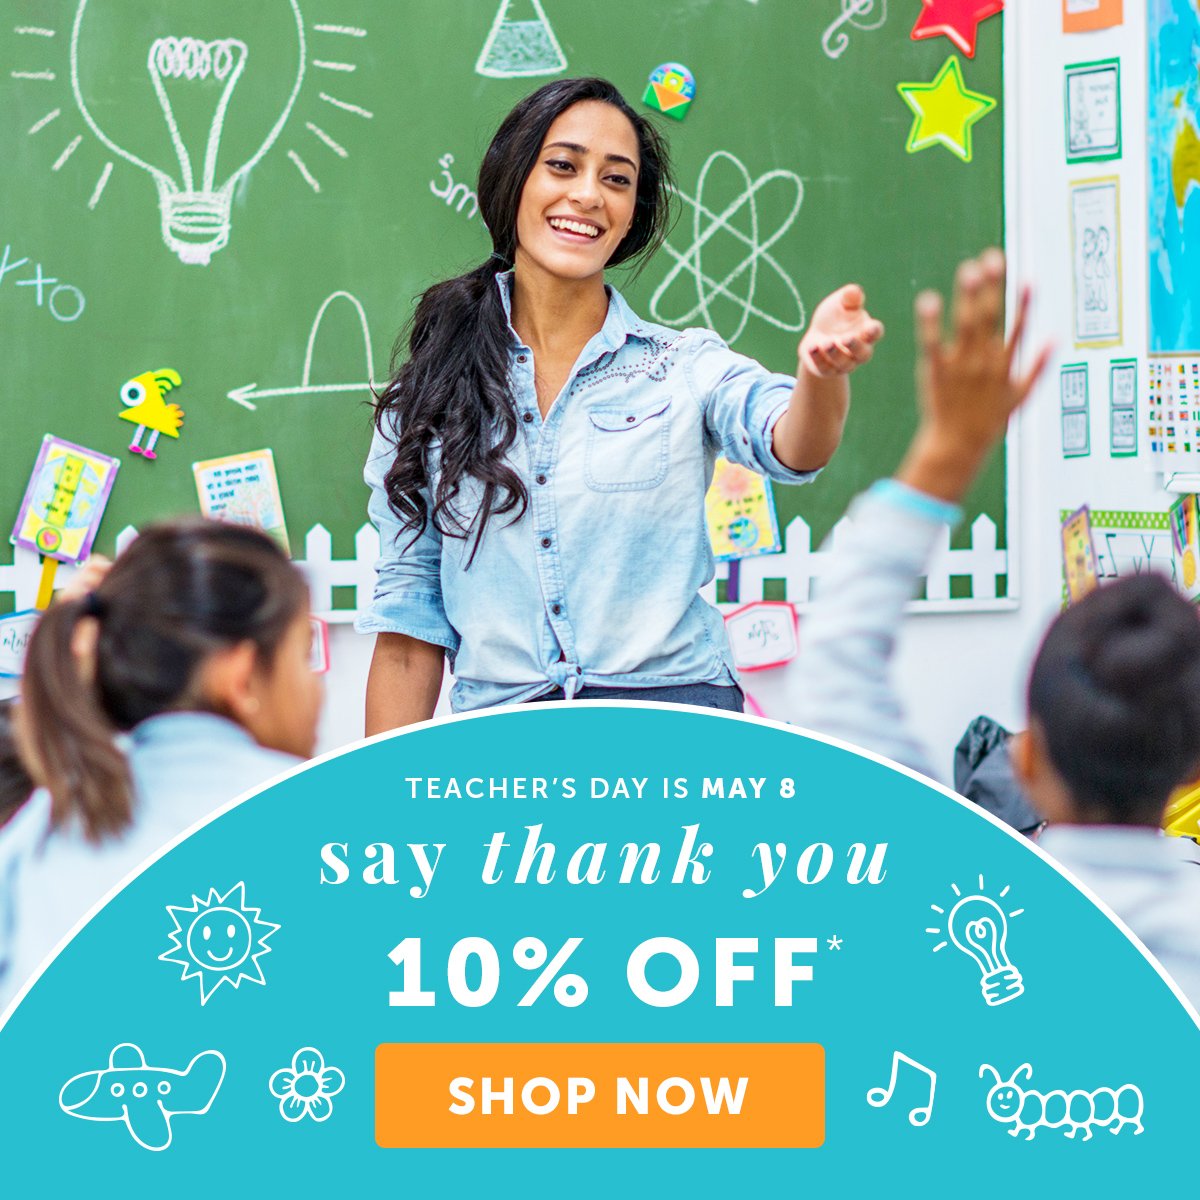 Send Teacher a special Thank you in time for Teacher's day!